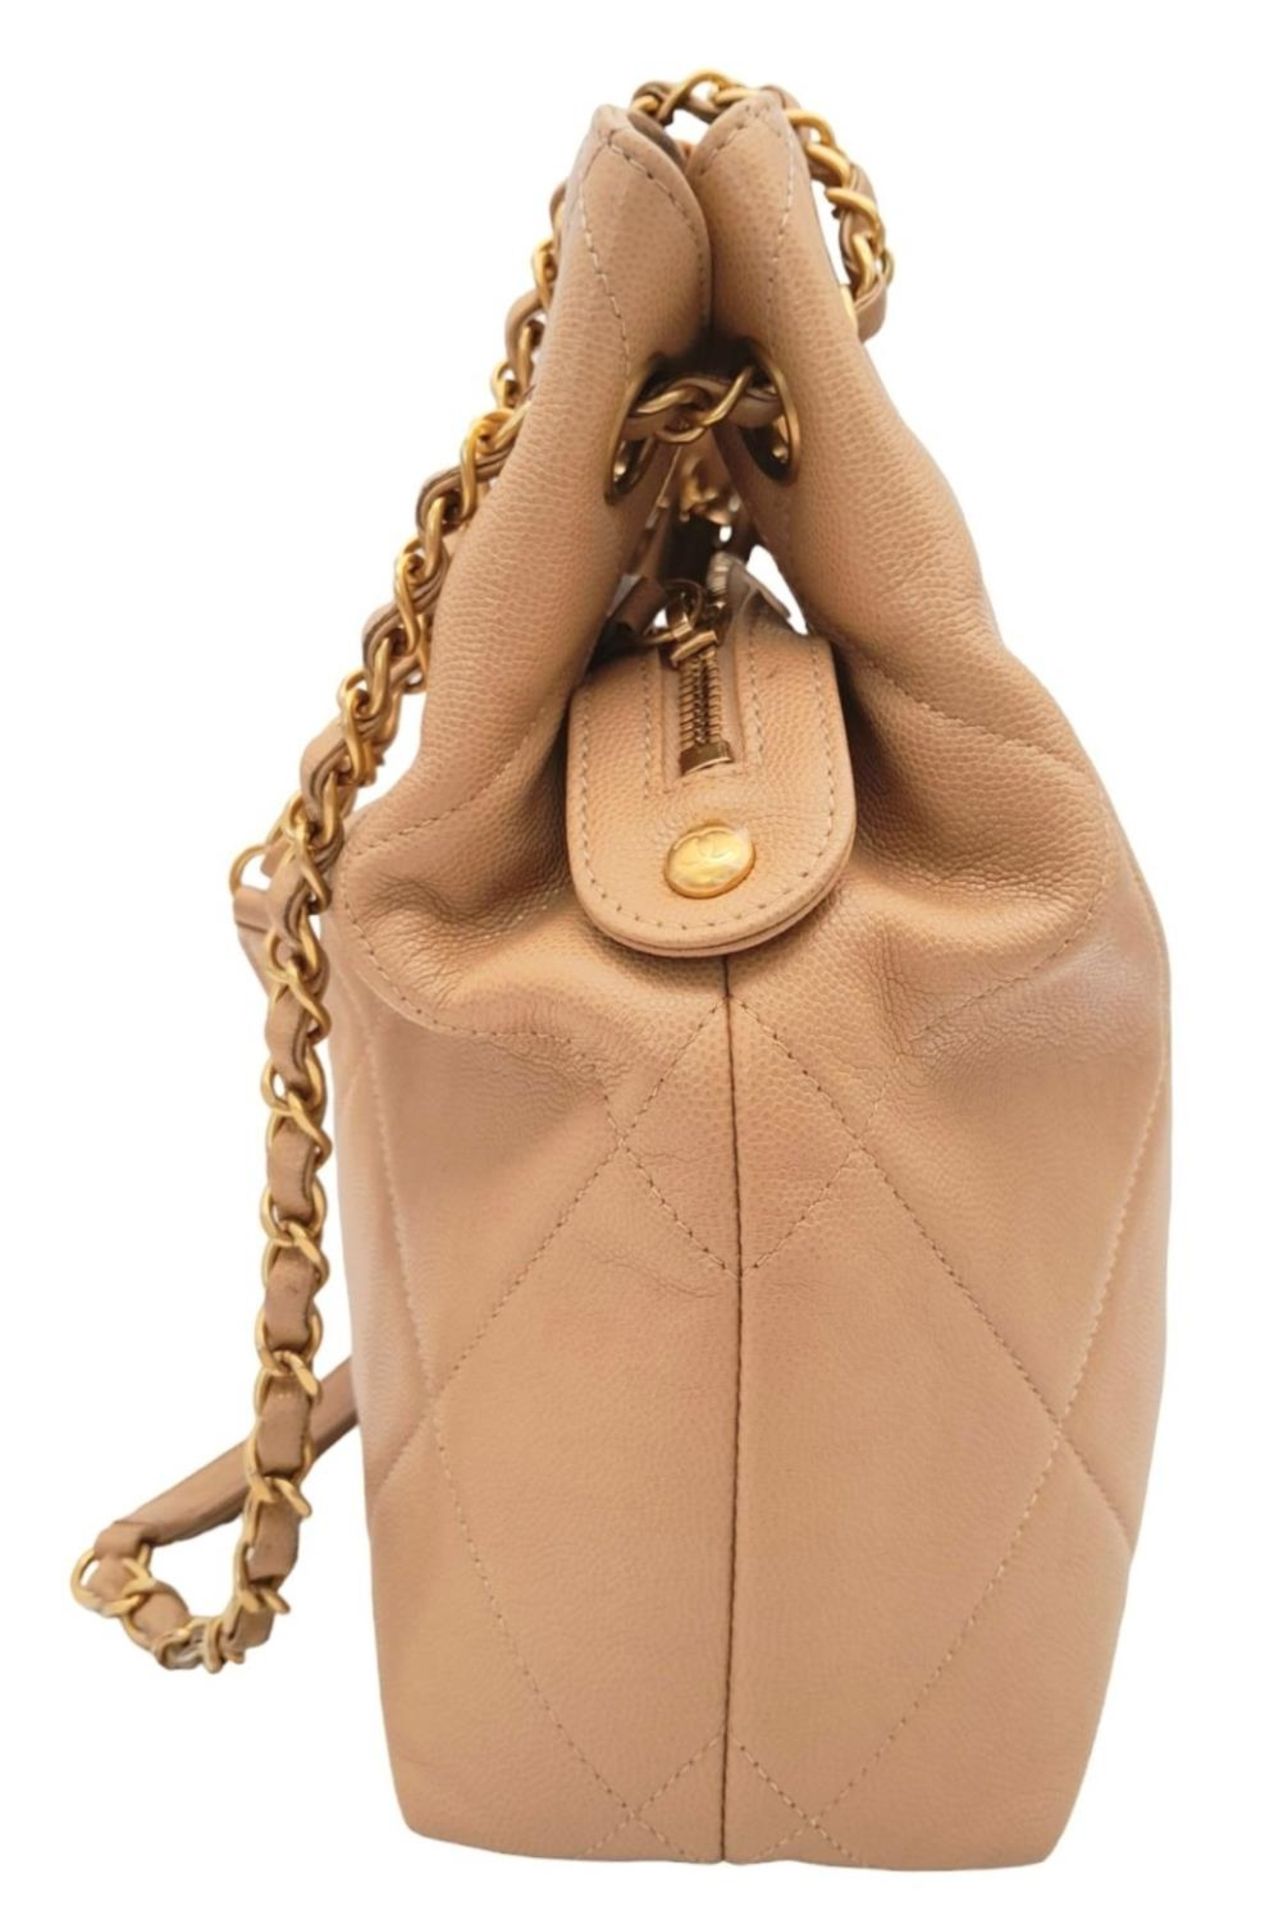 A Chanel Two-Way Chain Shoulder Bag. Beige caviar leather. Gold tone hardware. Spacious interior - Image 4 of 9